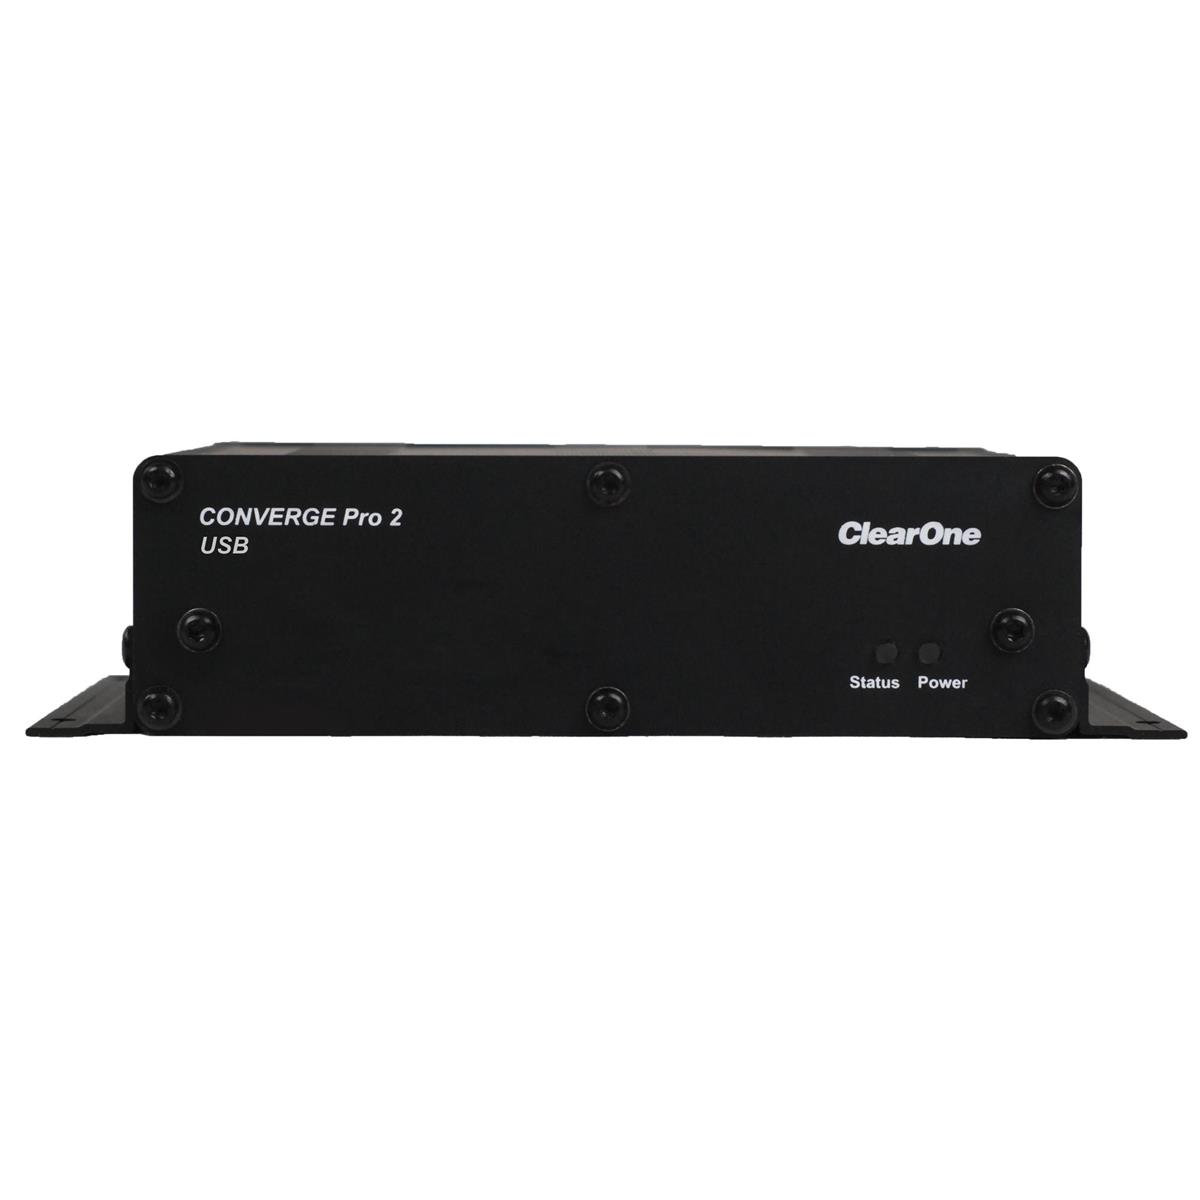 ClearOne USB Audio Expander for CONVERGE Pro 2 -  910-3200-302